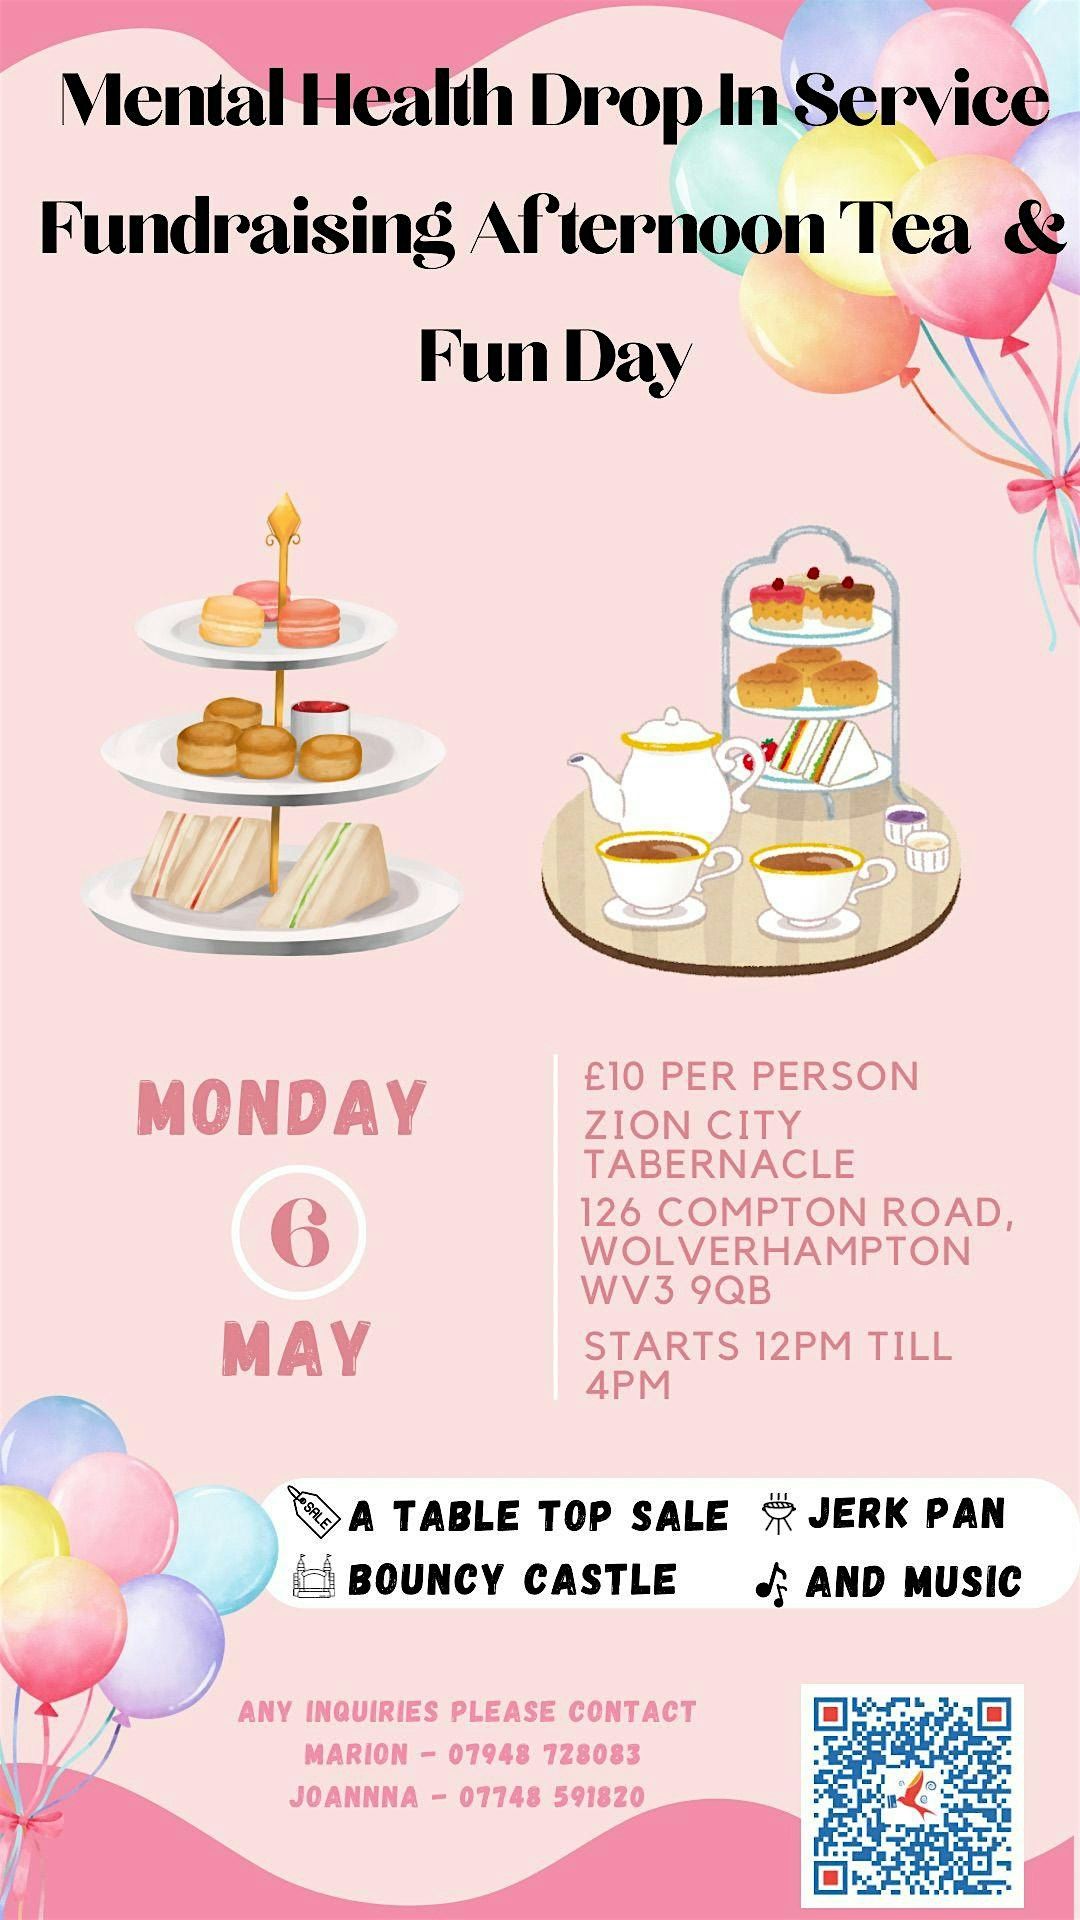 ZCT Afternoon Tea and Fundraiser